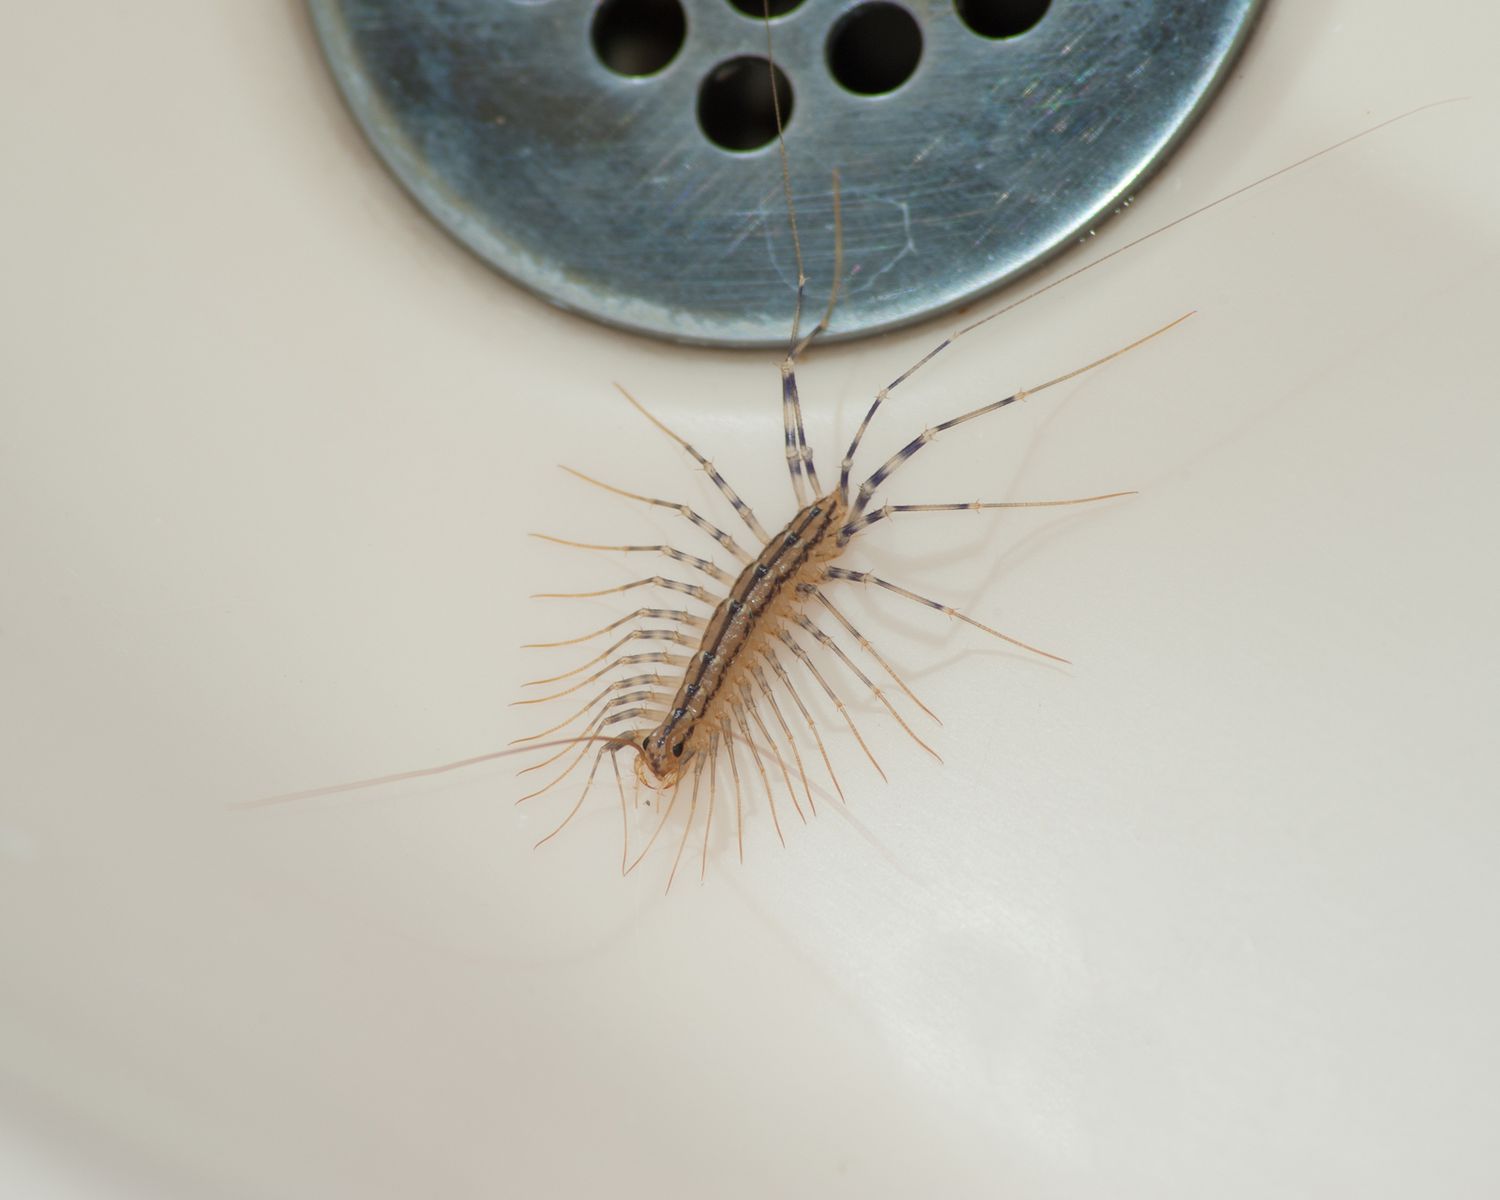 Huse centipede next to silver sink or tub drain on white porcelain